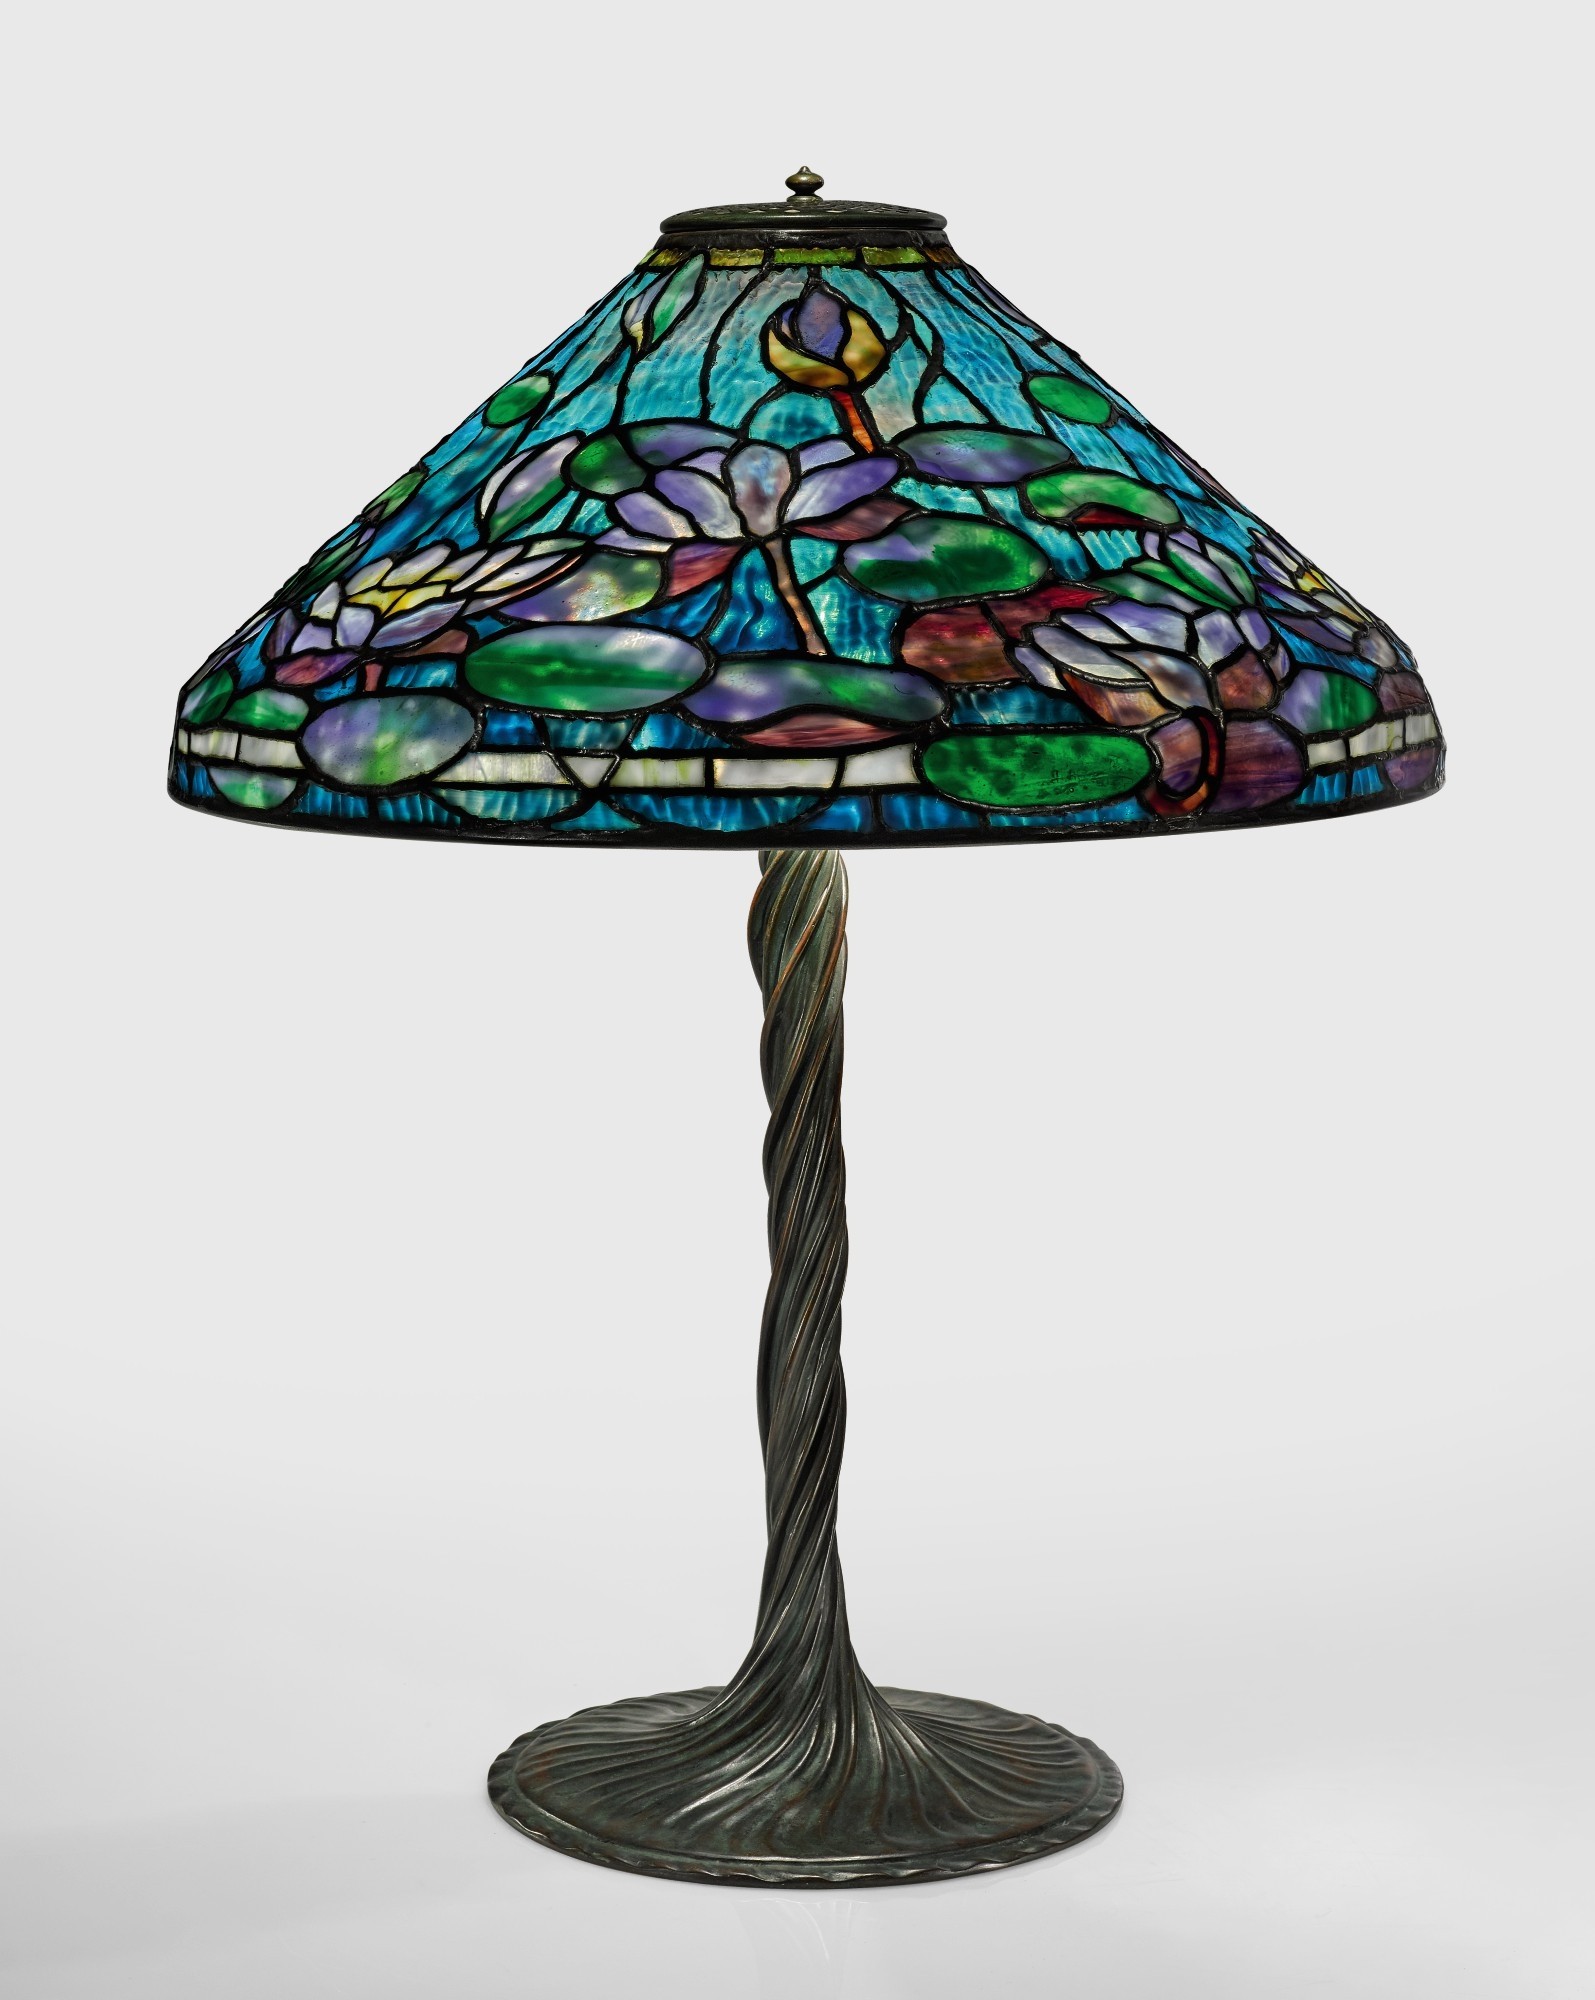 Tiffany studios pond lily table lamp dreaming in